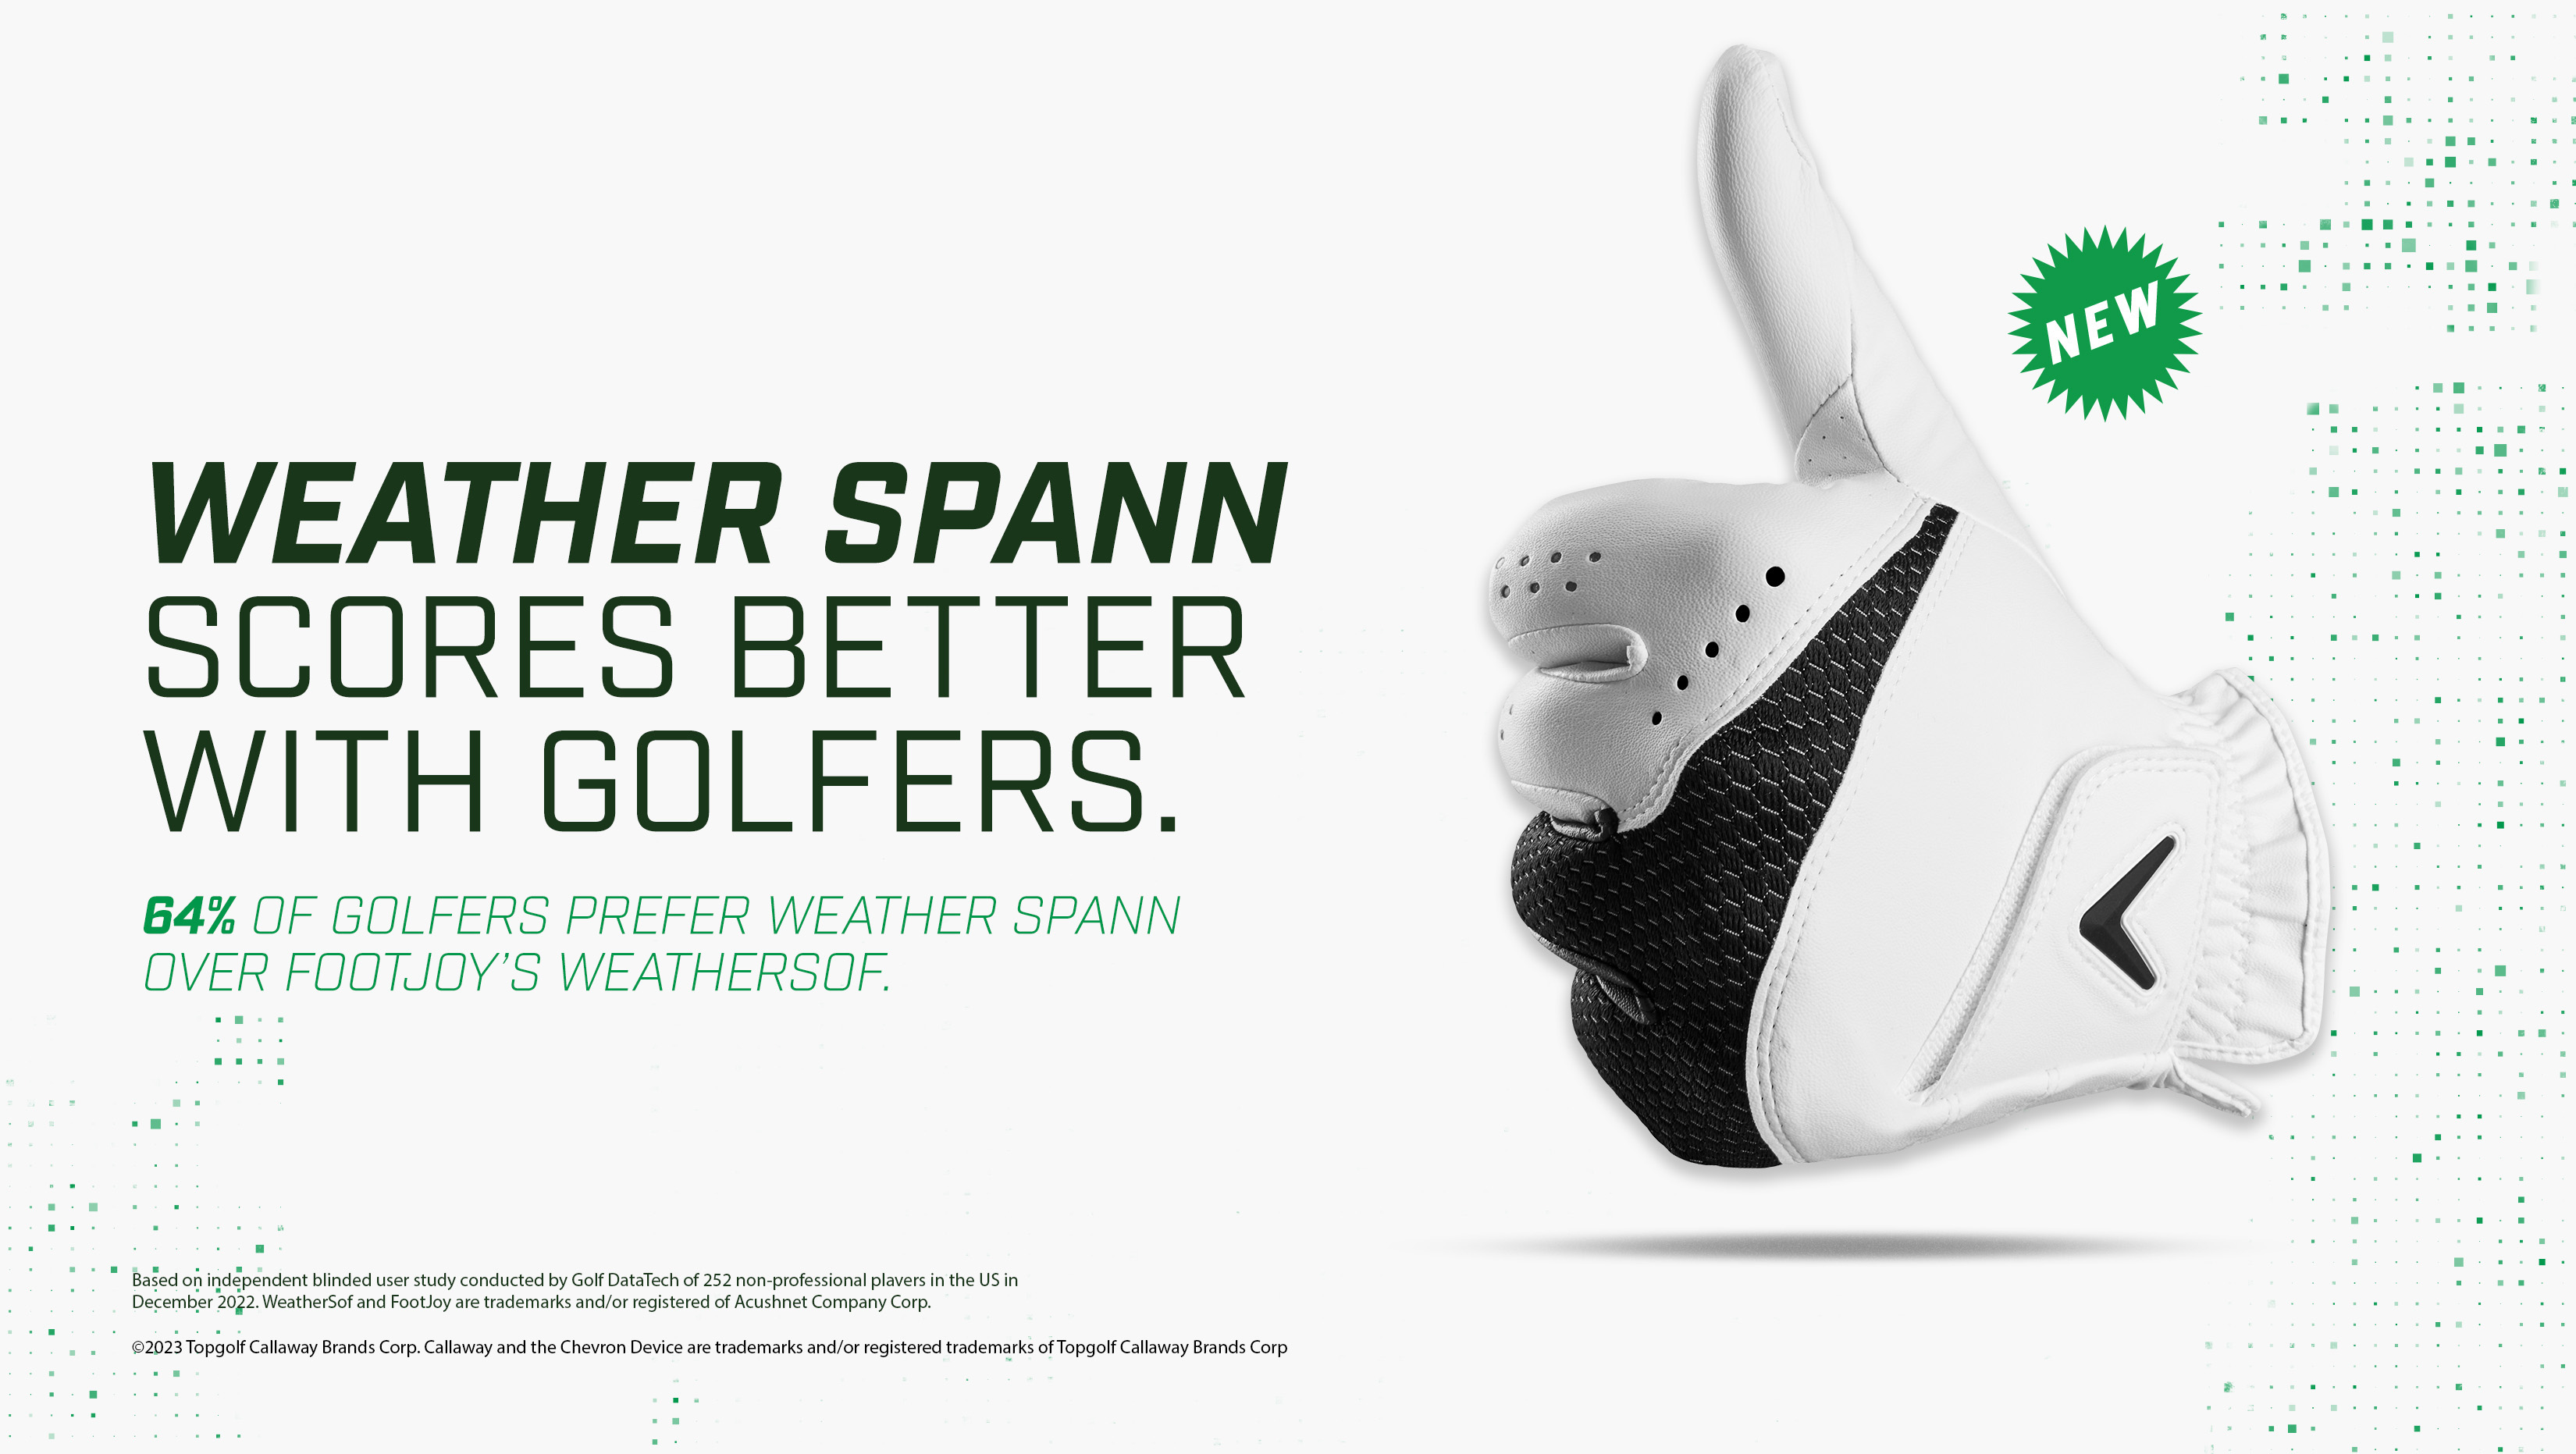 Weather Spann scores better with golfers. 64% of golfers prefer Weather Spann over Footjoy's Weathersof.